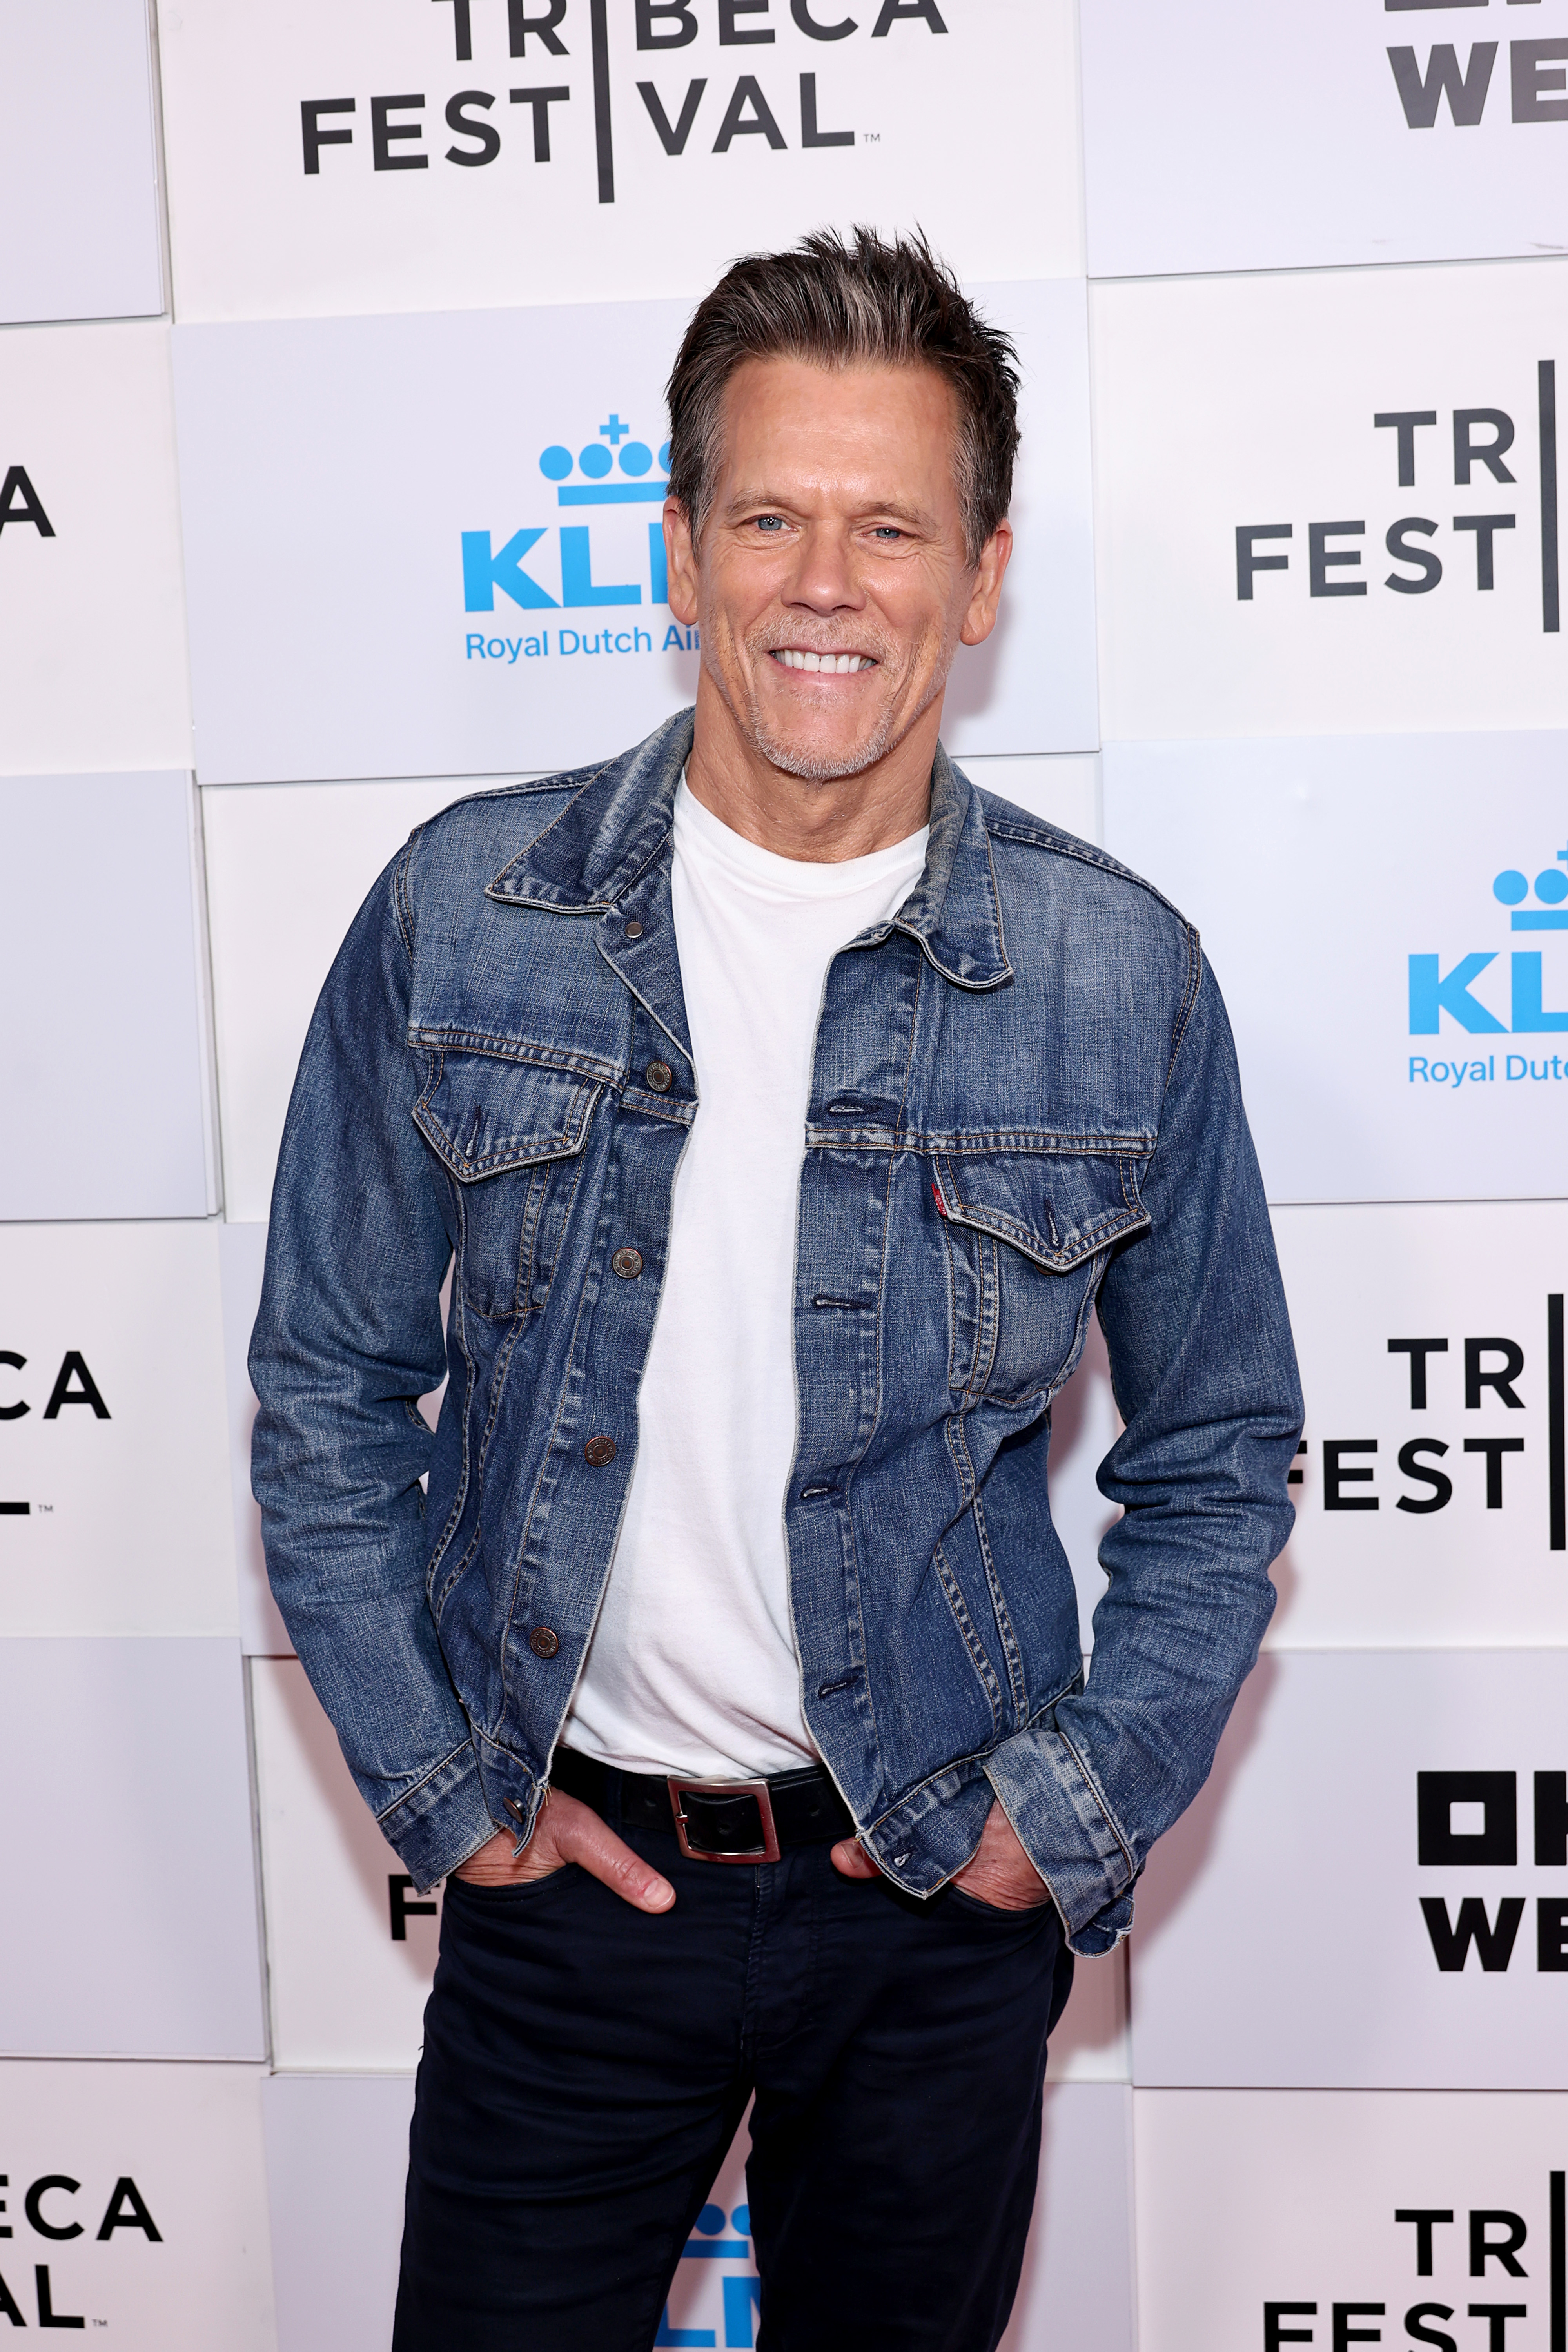 Kevin Bacon poses at the Tribeca Festival, wearing a casual denim jacket over a white shirt and black pants. He smiles with hands in his pockets